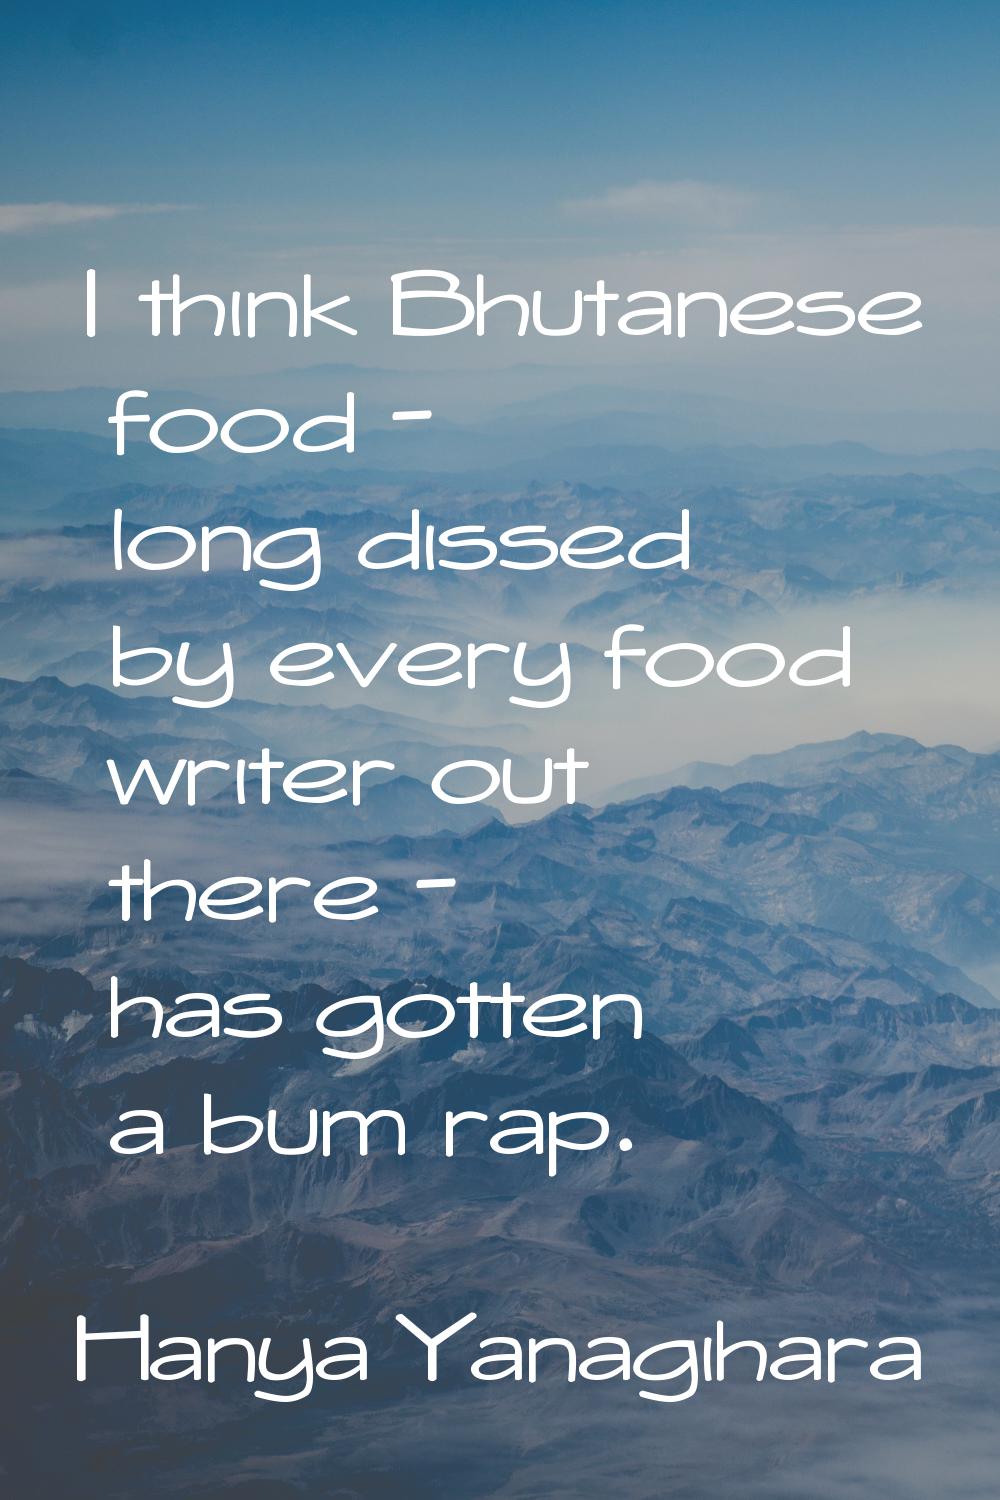 I think Bhutanese food - long dissed by every food writer out there - has gotten a bum rap.